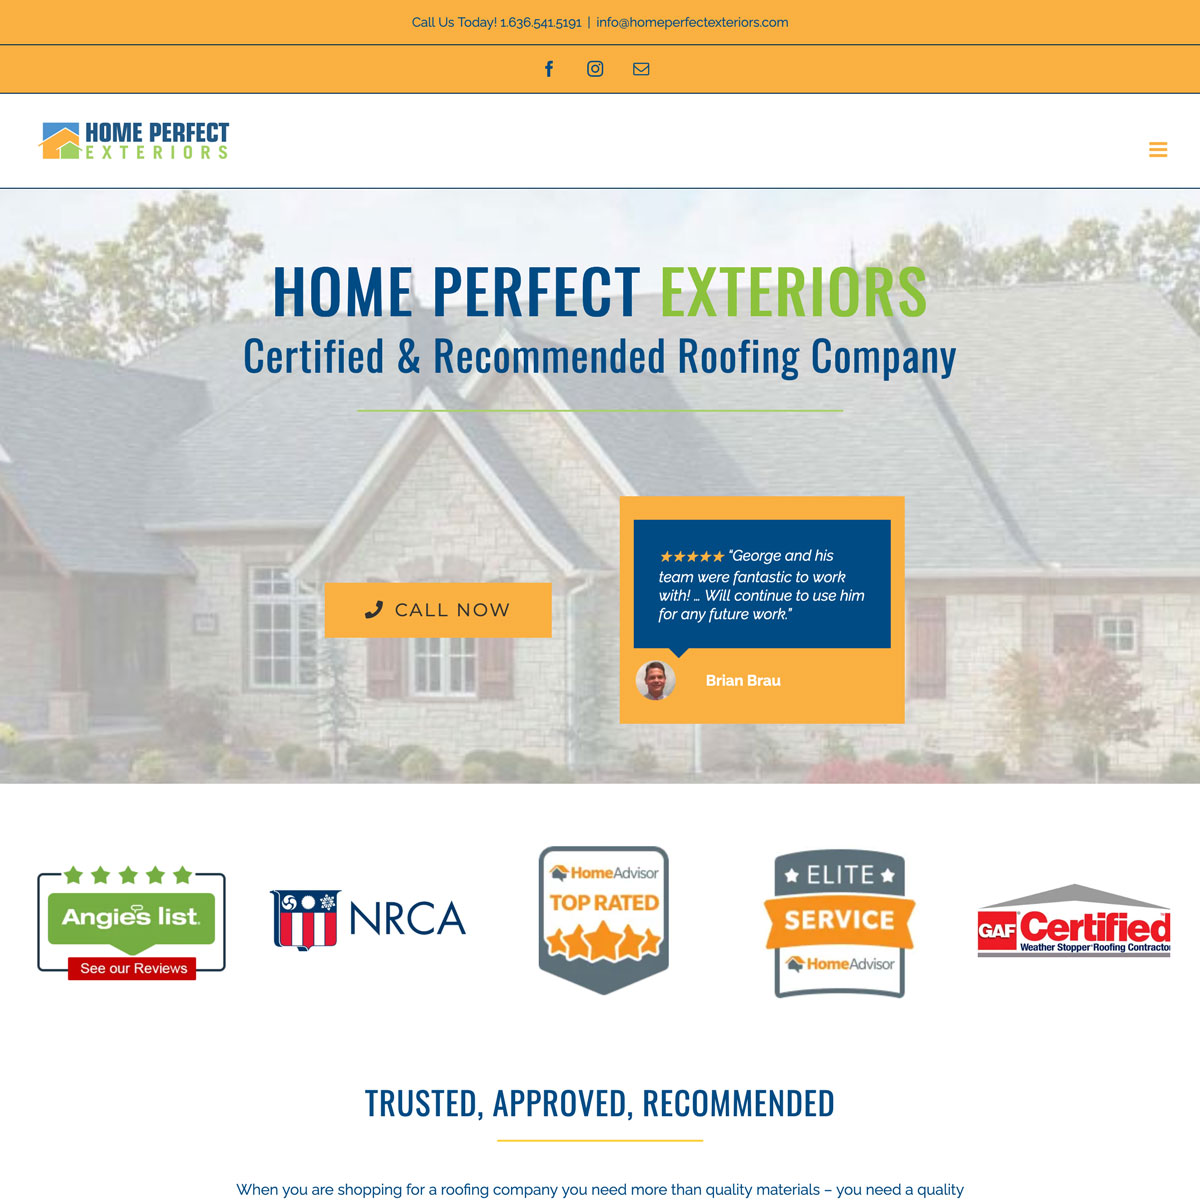 Homepage of the Home Perfect Exteriors website